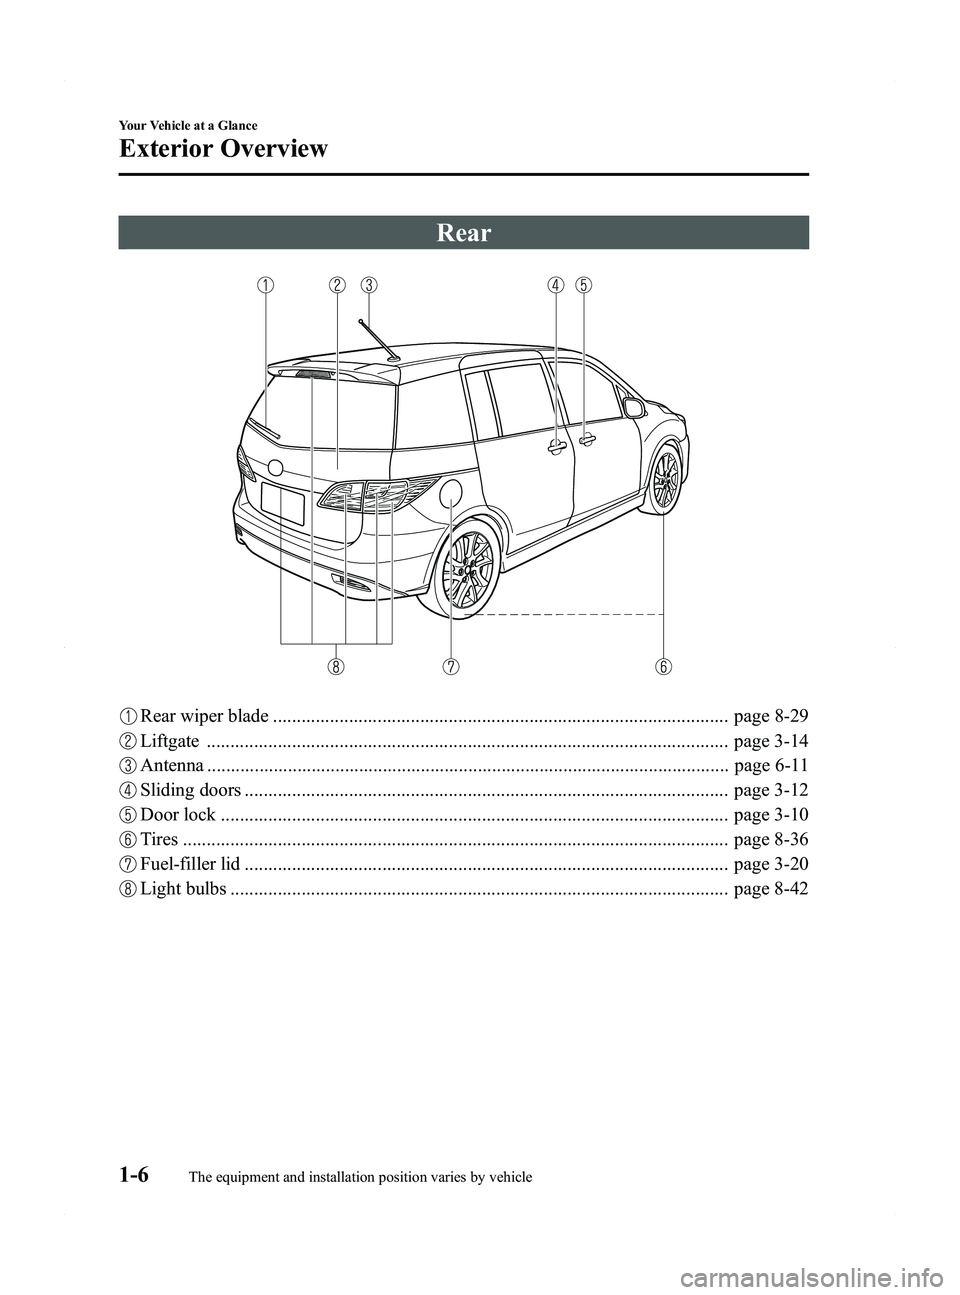 MAZDA MODEL 5 2015  Owners Manual Black plate (12,1)
Rear
Rear wiper blade ................................................................................................ page 8-29
Liftgate ...........................................